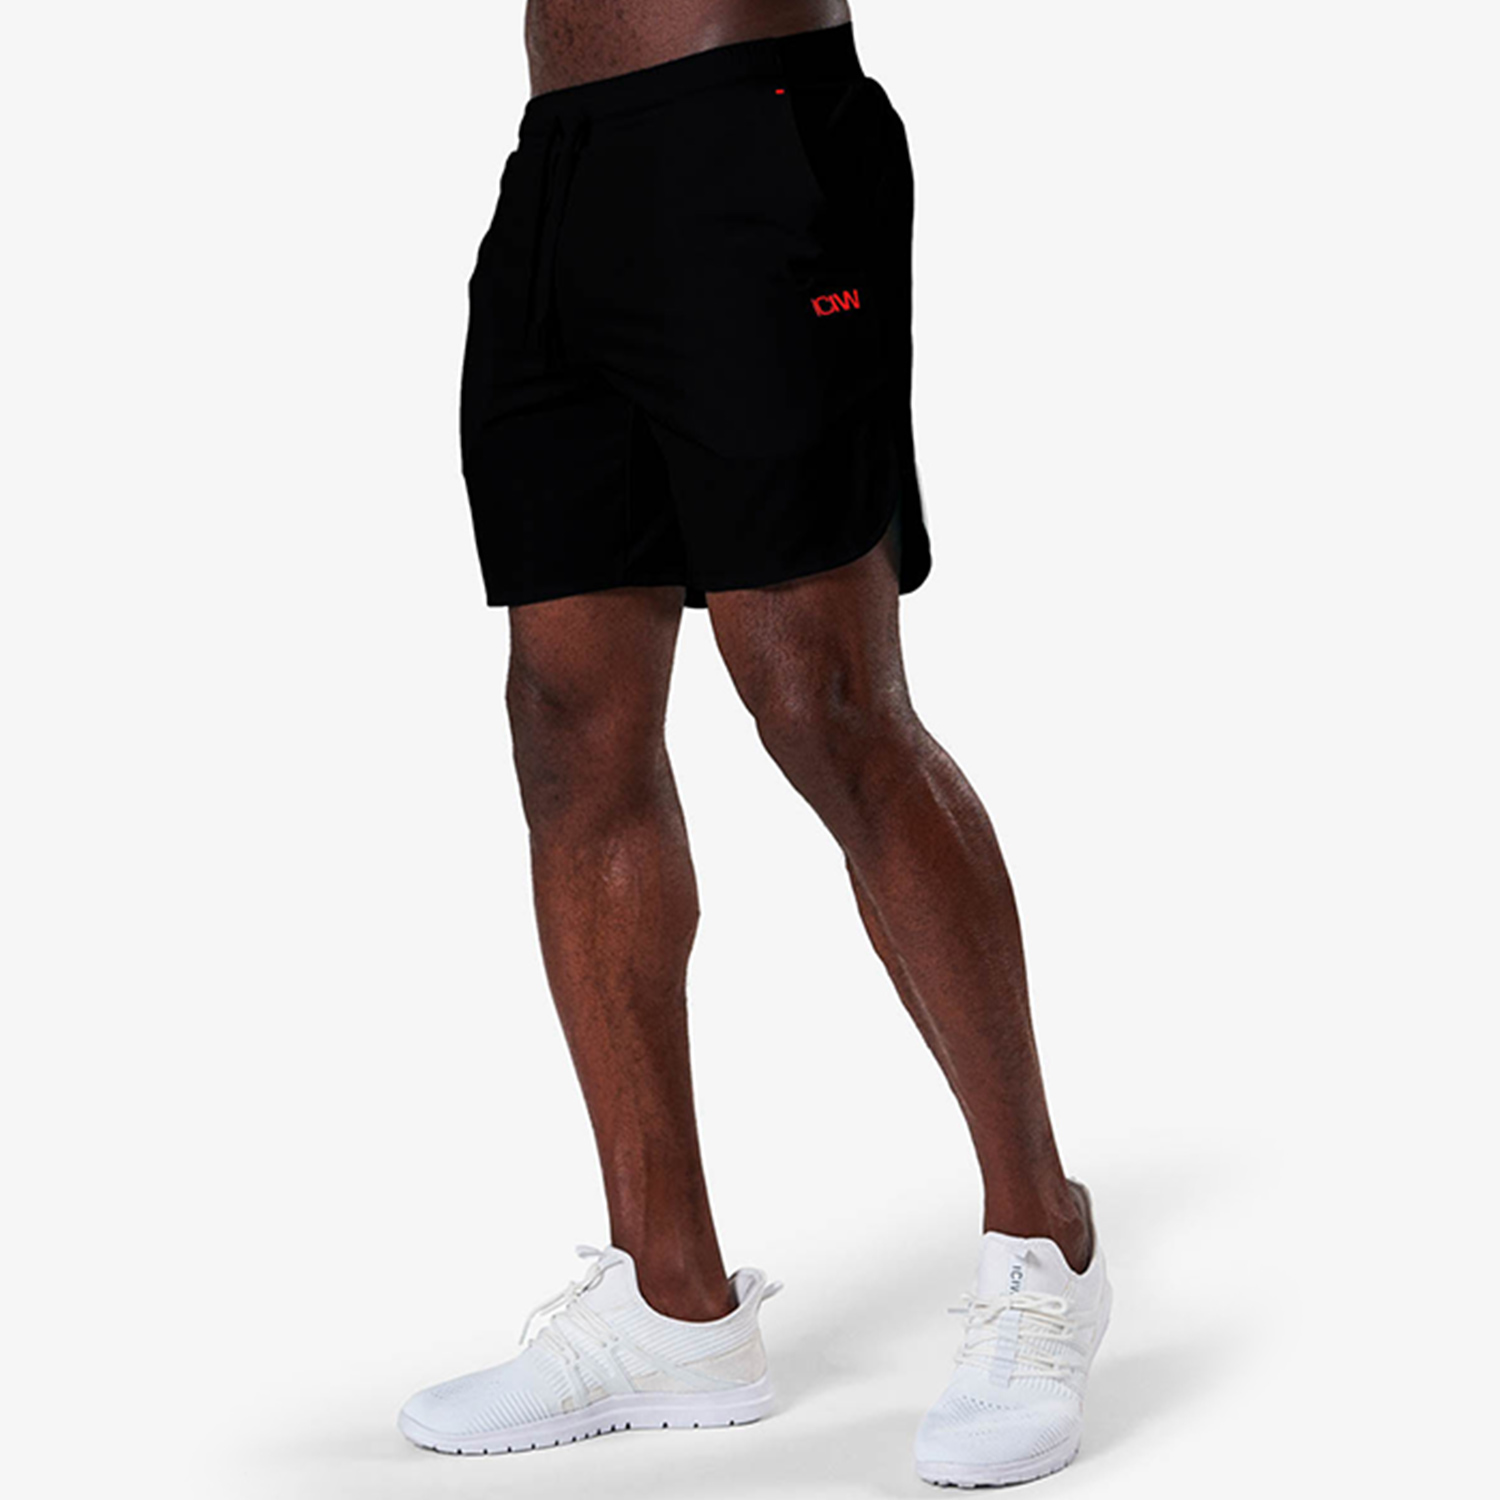 Competitor Shorts Black